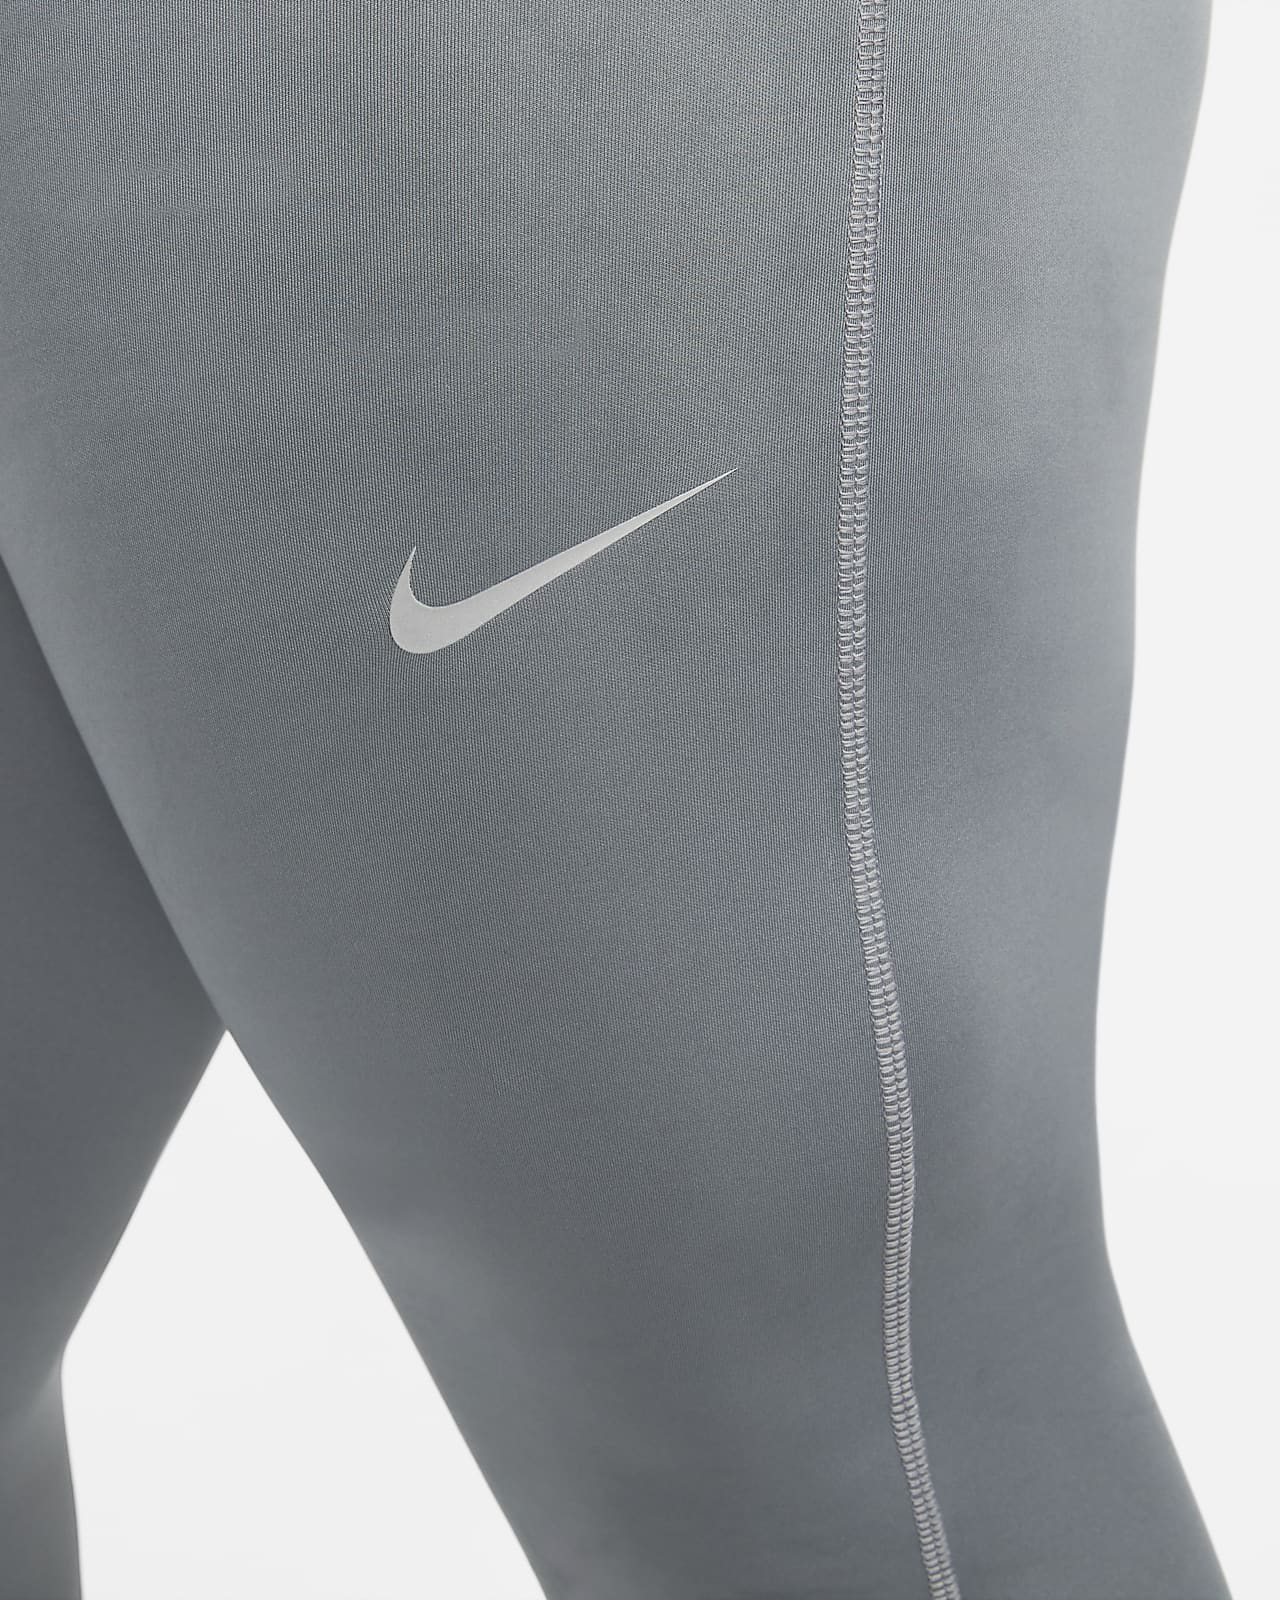 NIKE Dri-FIT Challenger Essential Running Tights (Collants et pantalons)